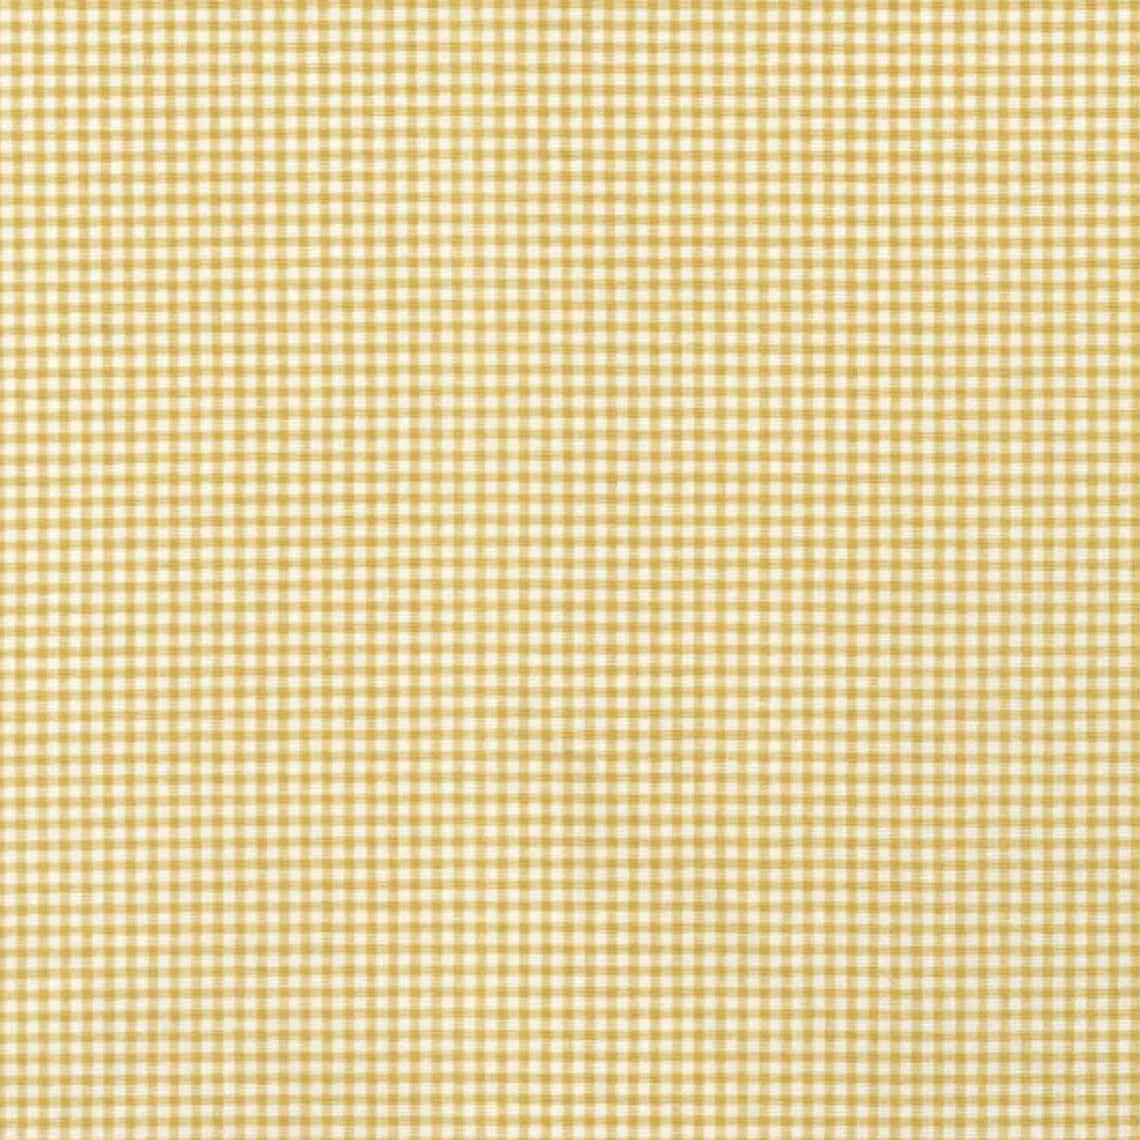 duvet cover in farmhouse barley yellow gold gingham check